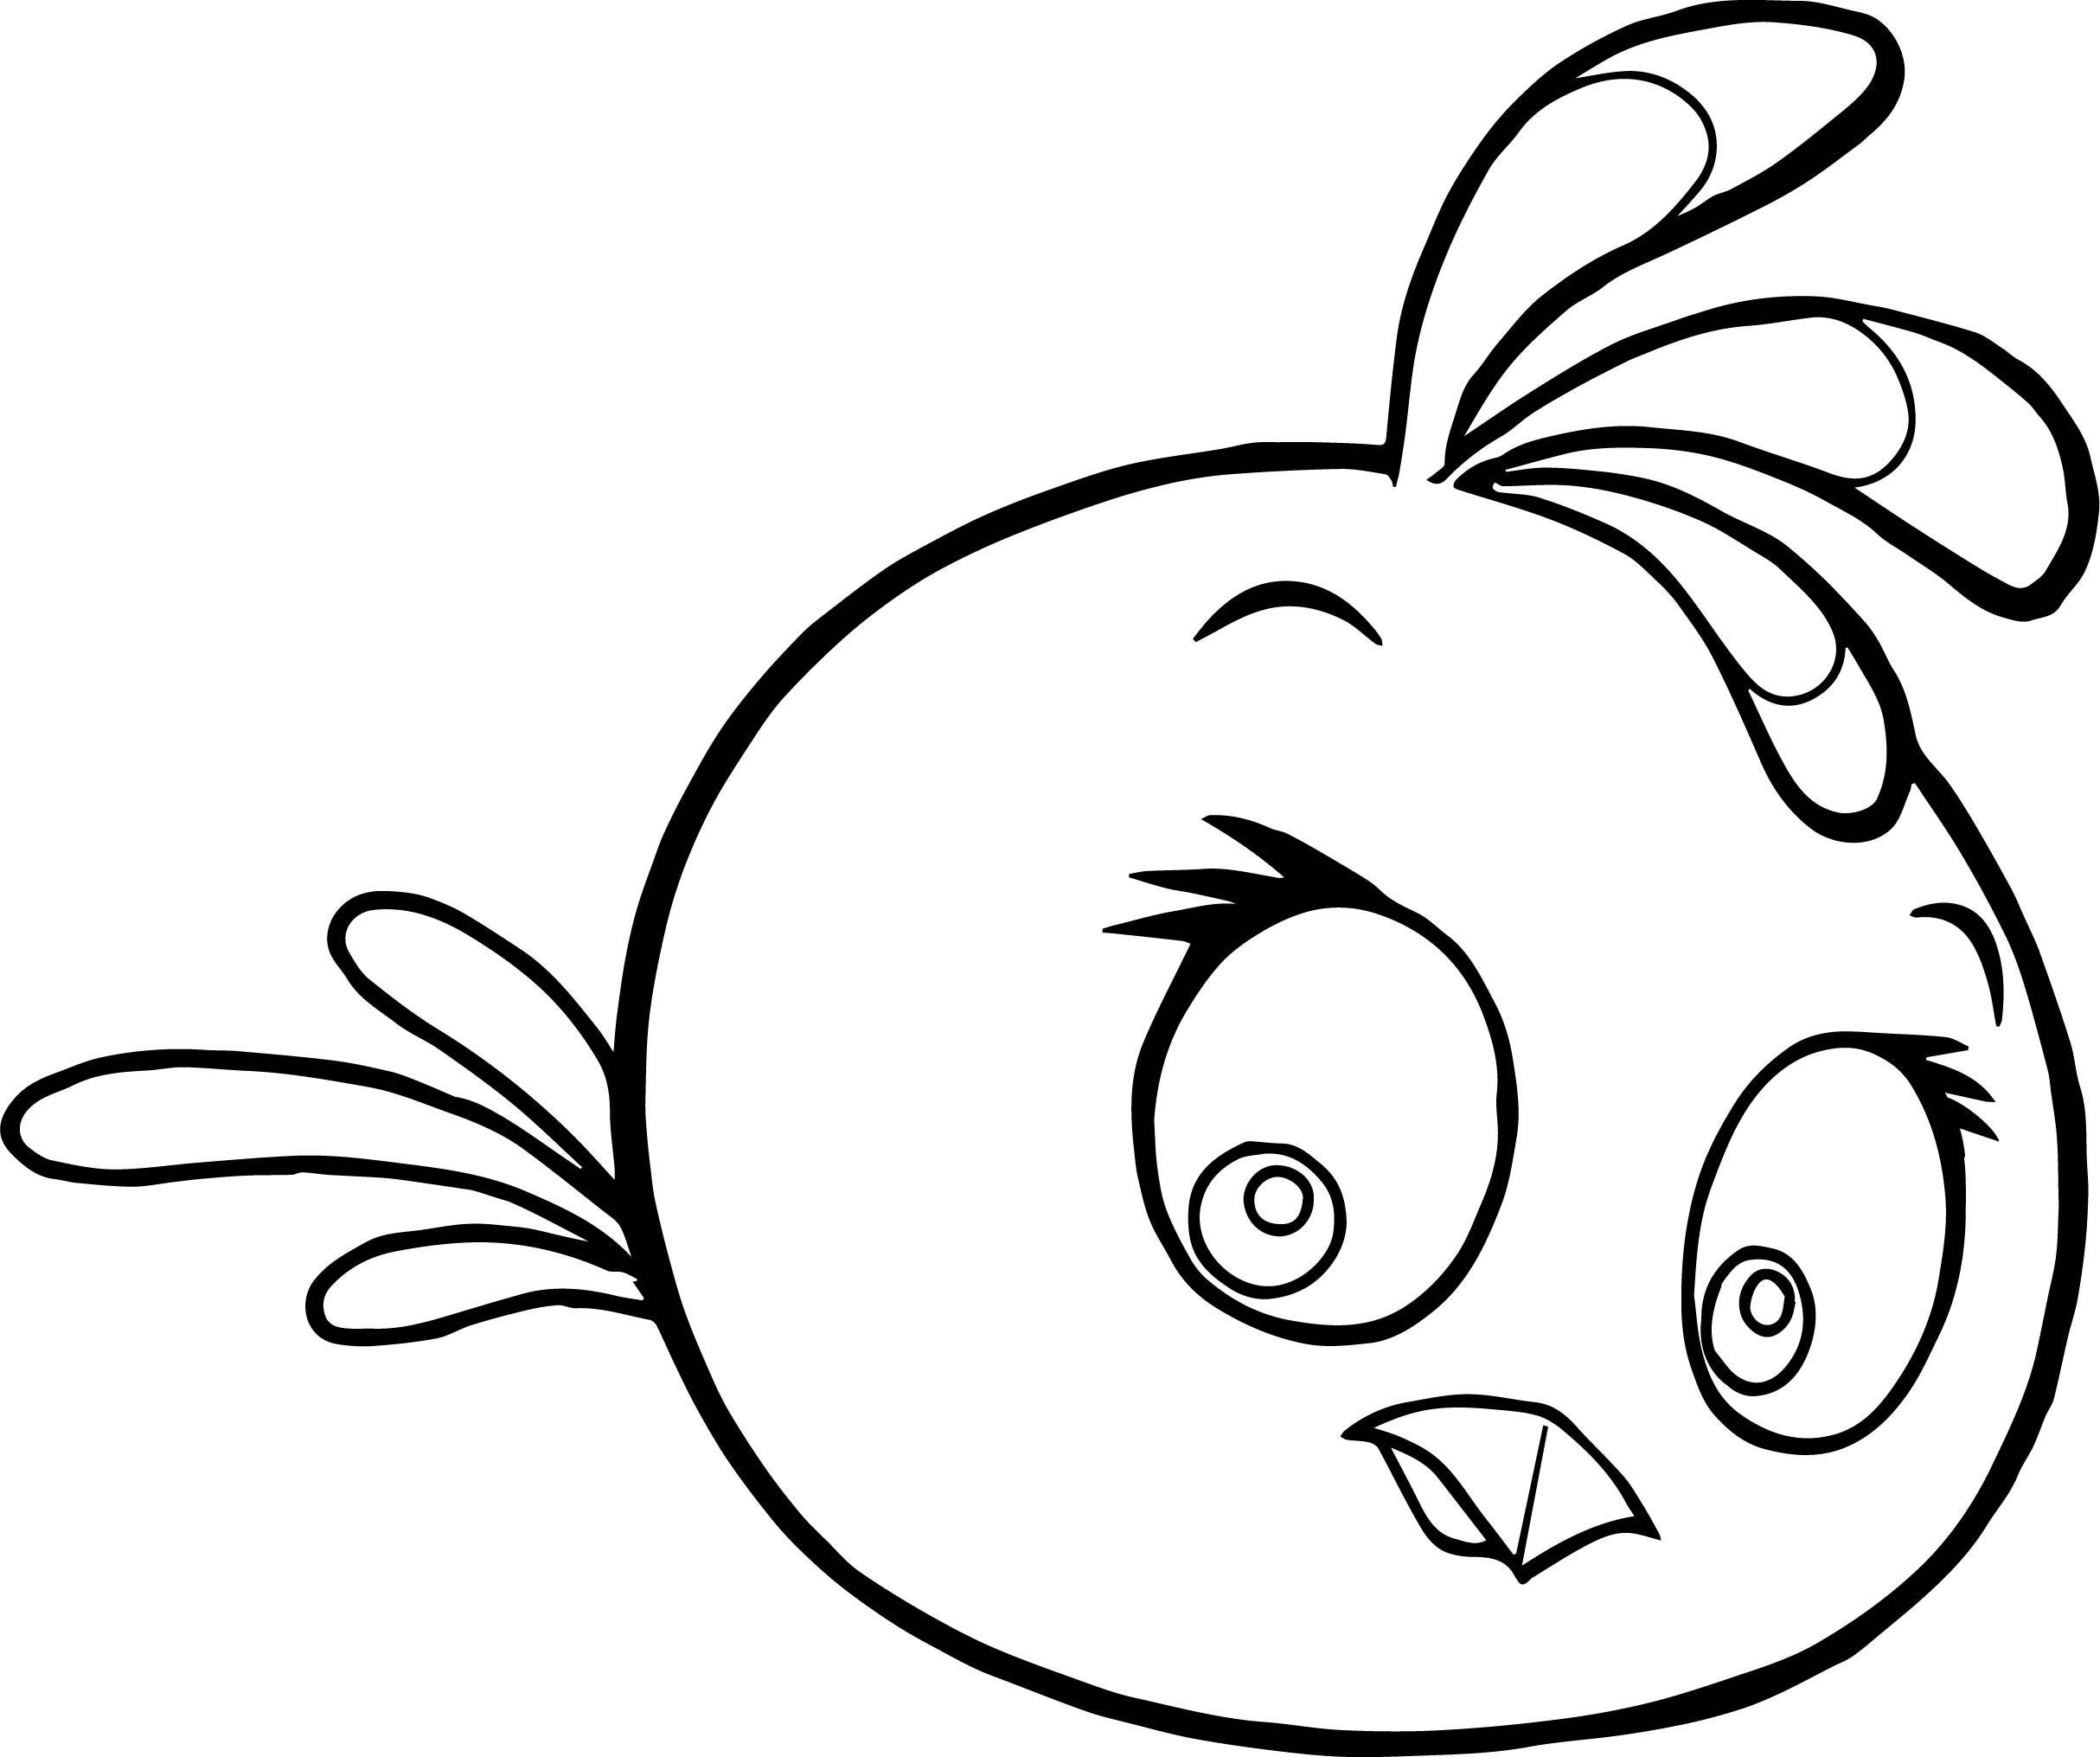 Girl Angry Birds Coloring Pages
 Cute Girl Angry Birds Coloring Page